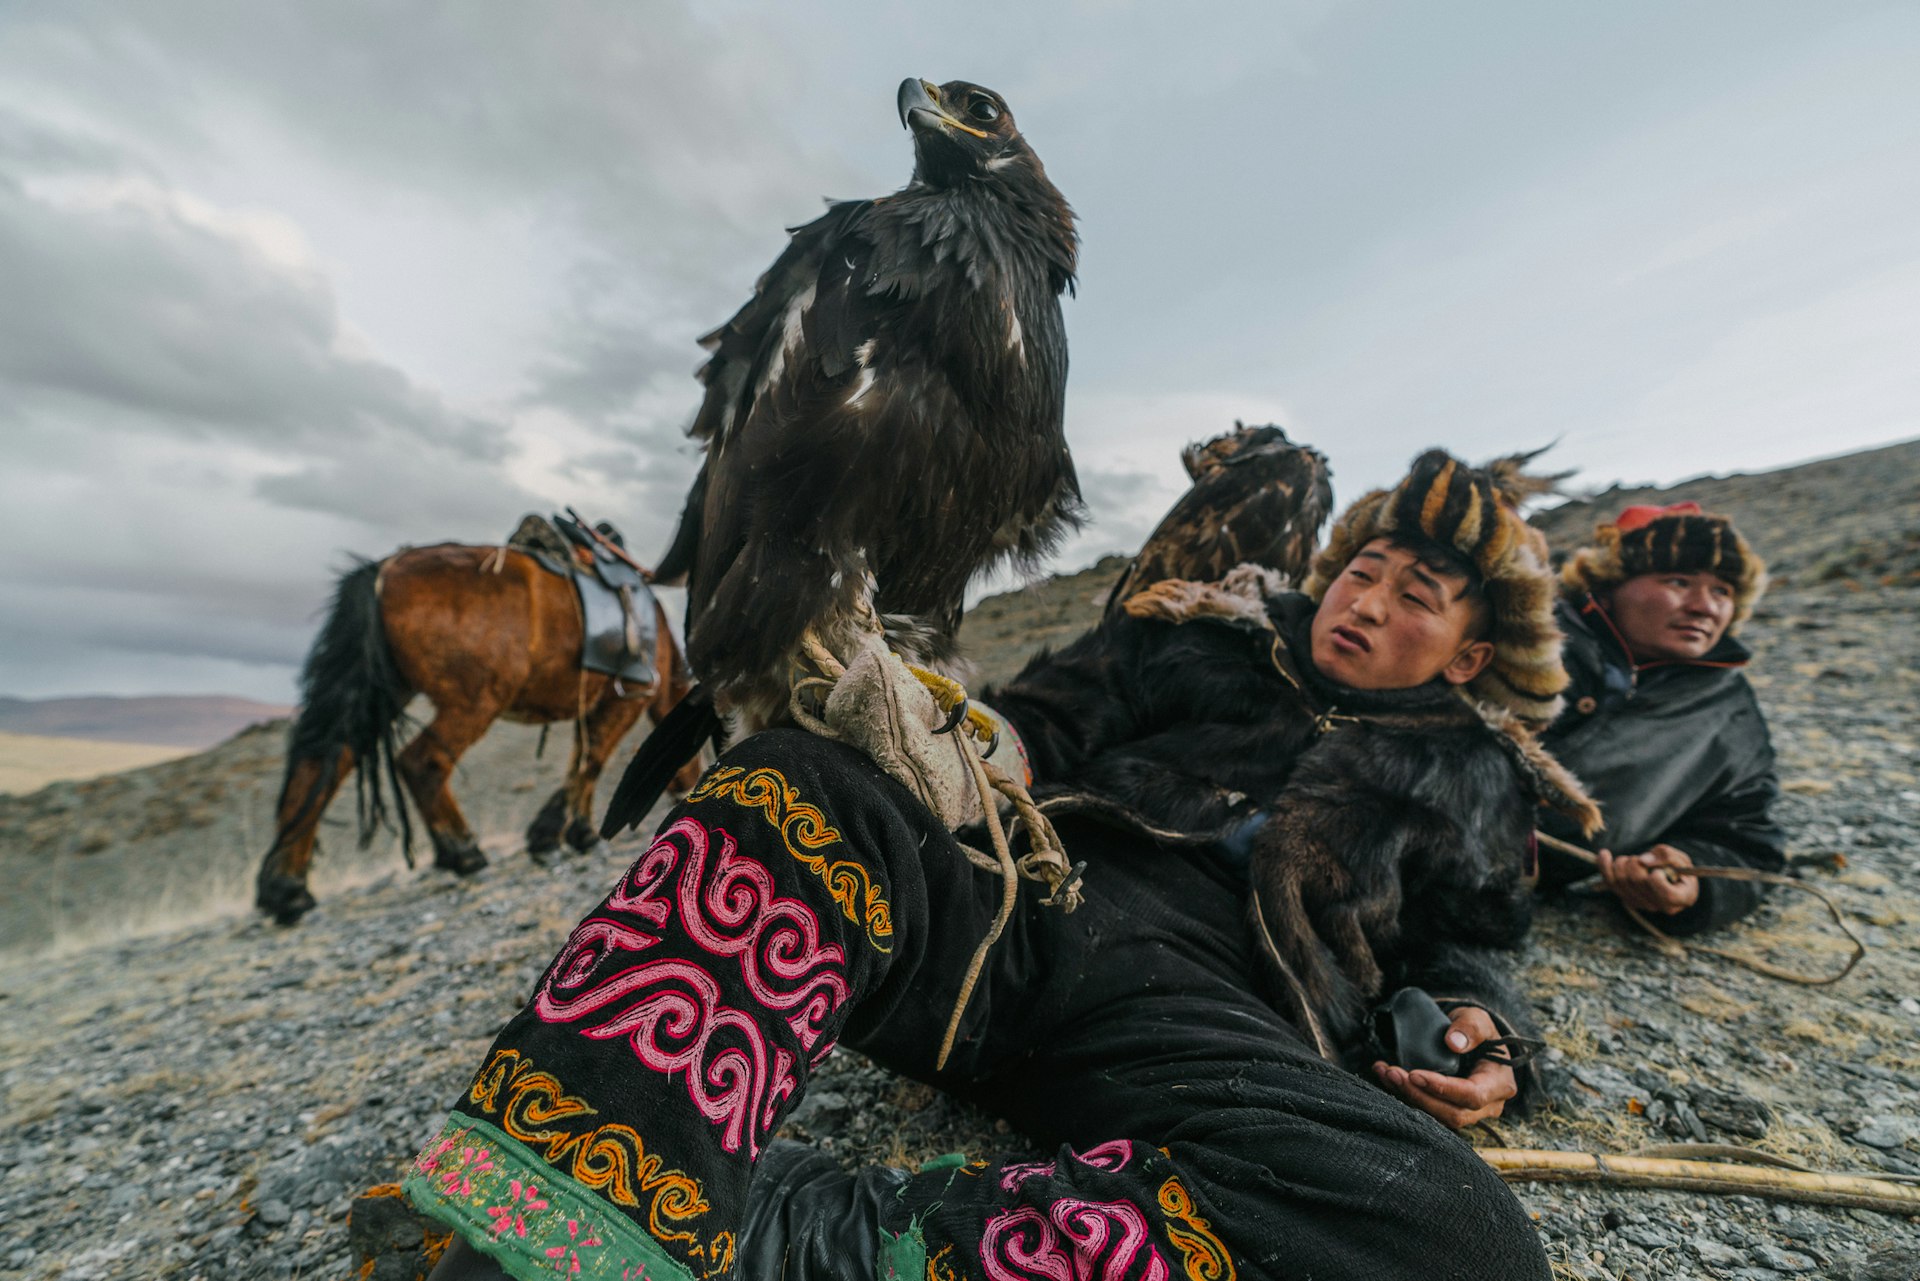 Eagle hunters resting on a mountainside in Mongolia